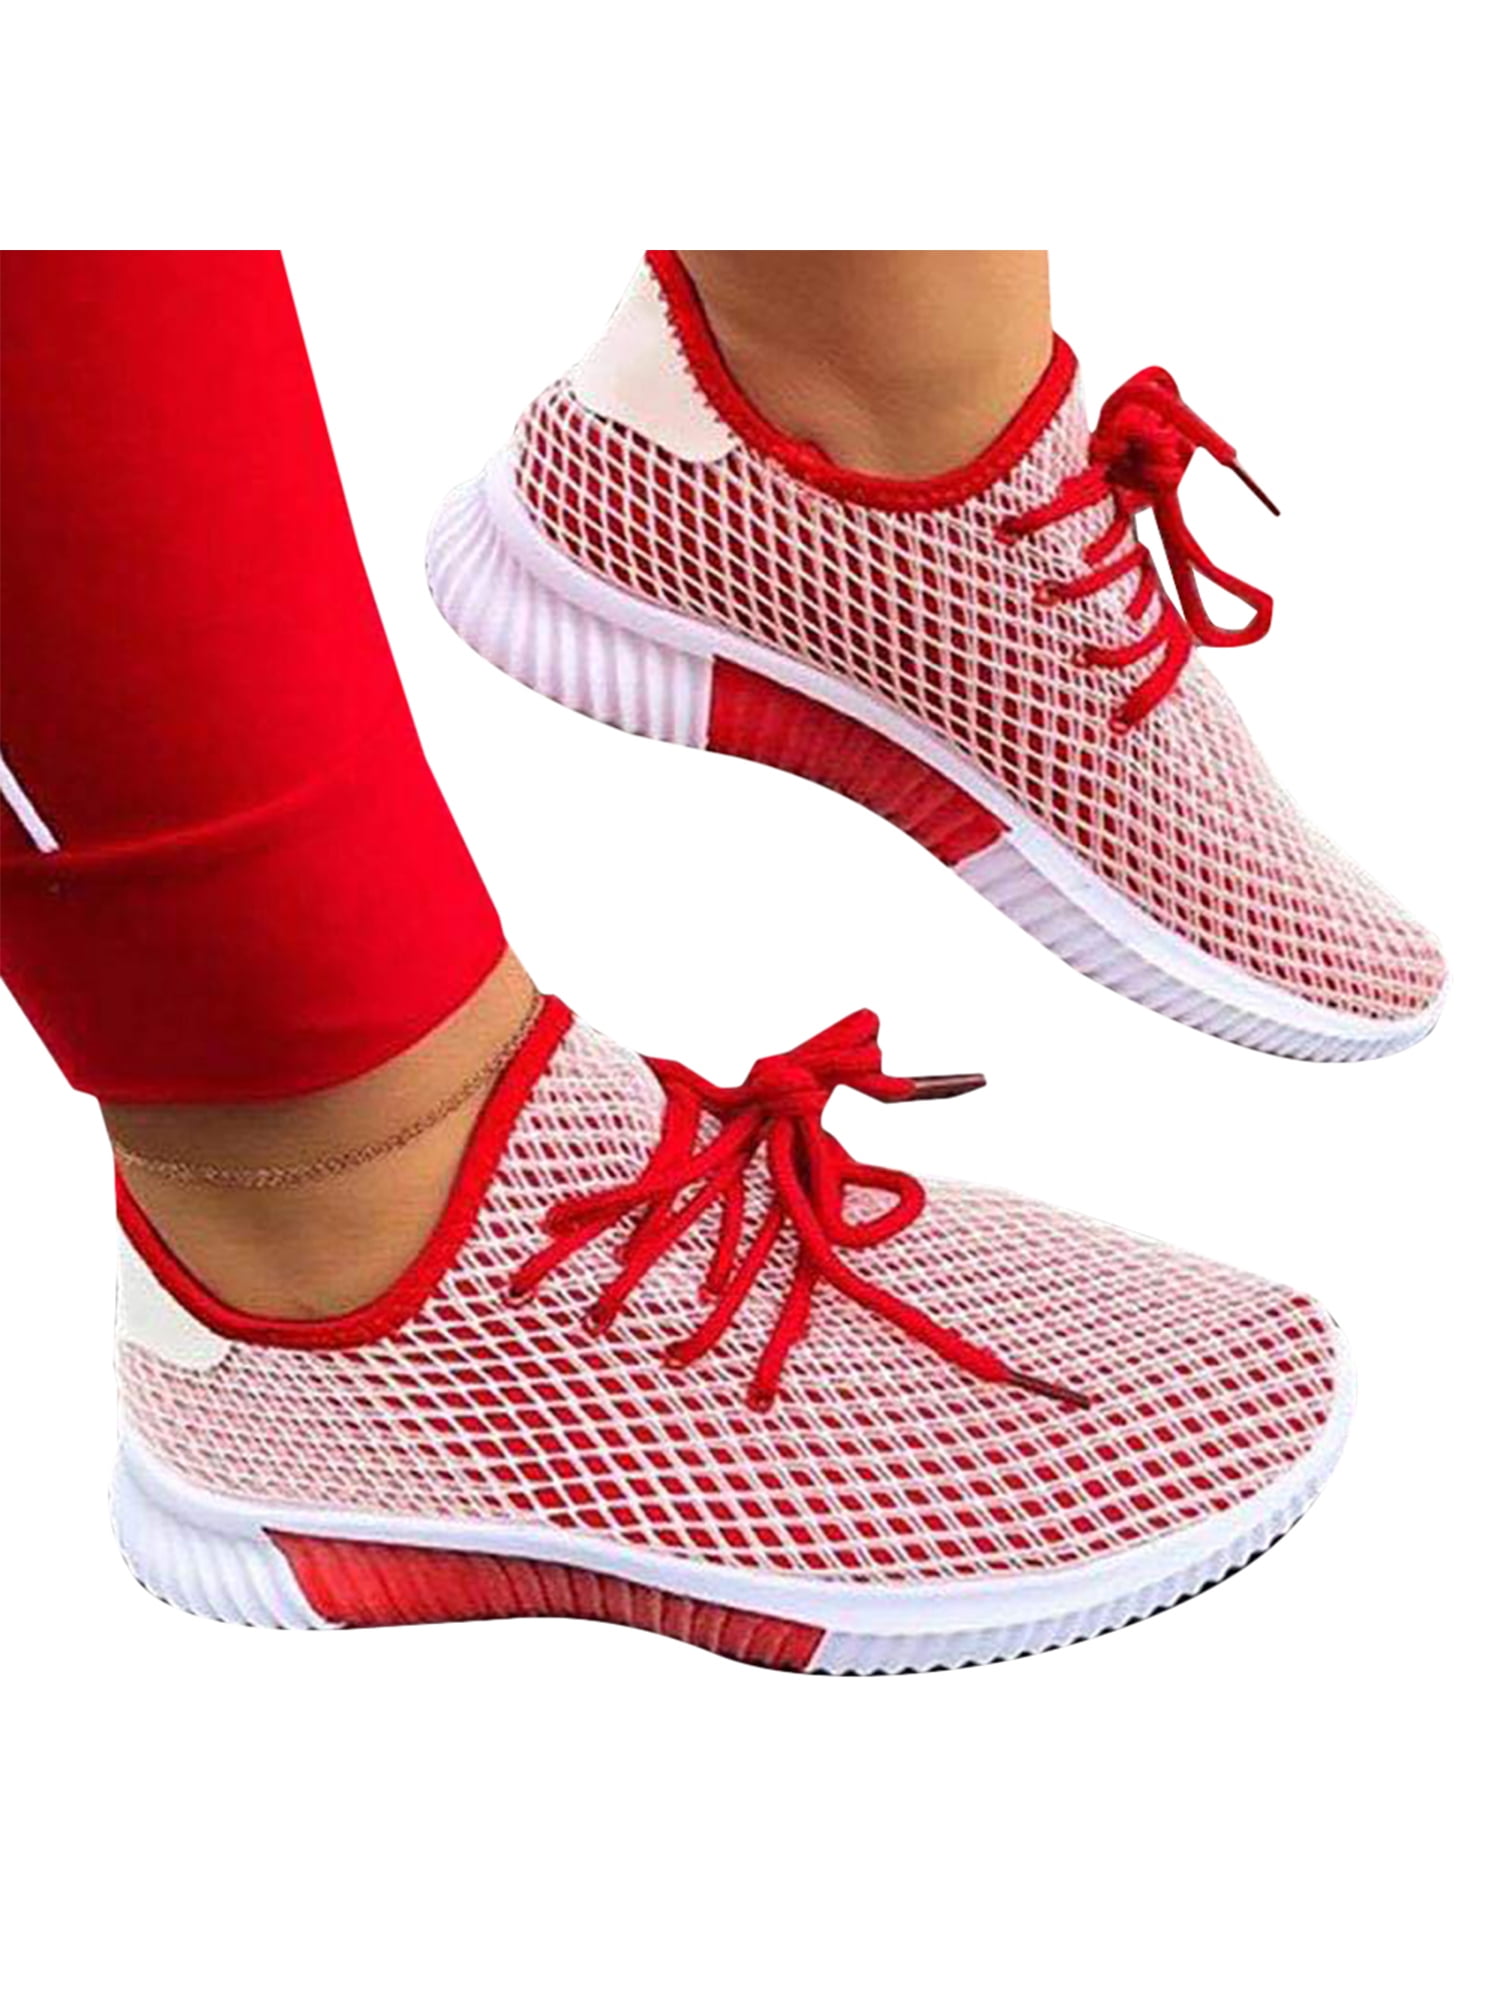 WOMENS LADIES KNIT TRAINERS LACE UP SPORT SNEAKERS CASUAL RUNNING WOMEN SHOES